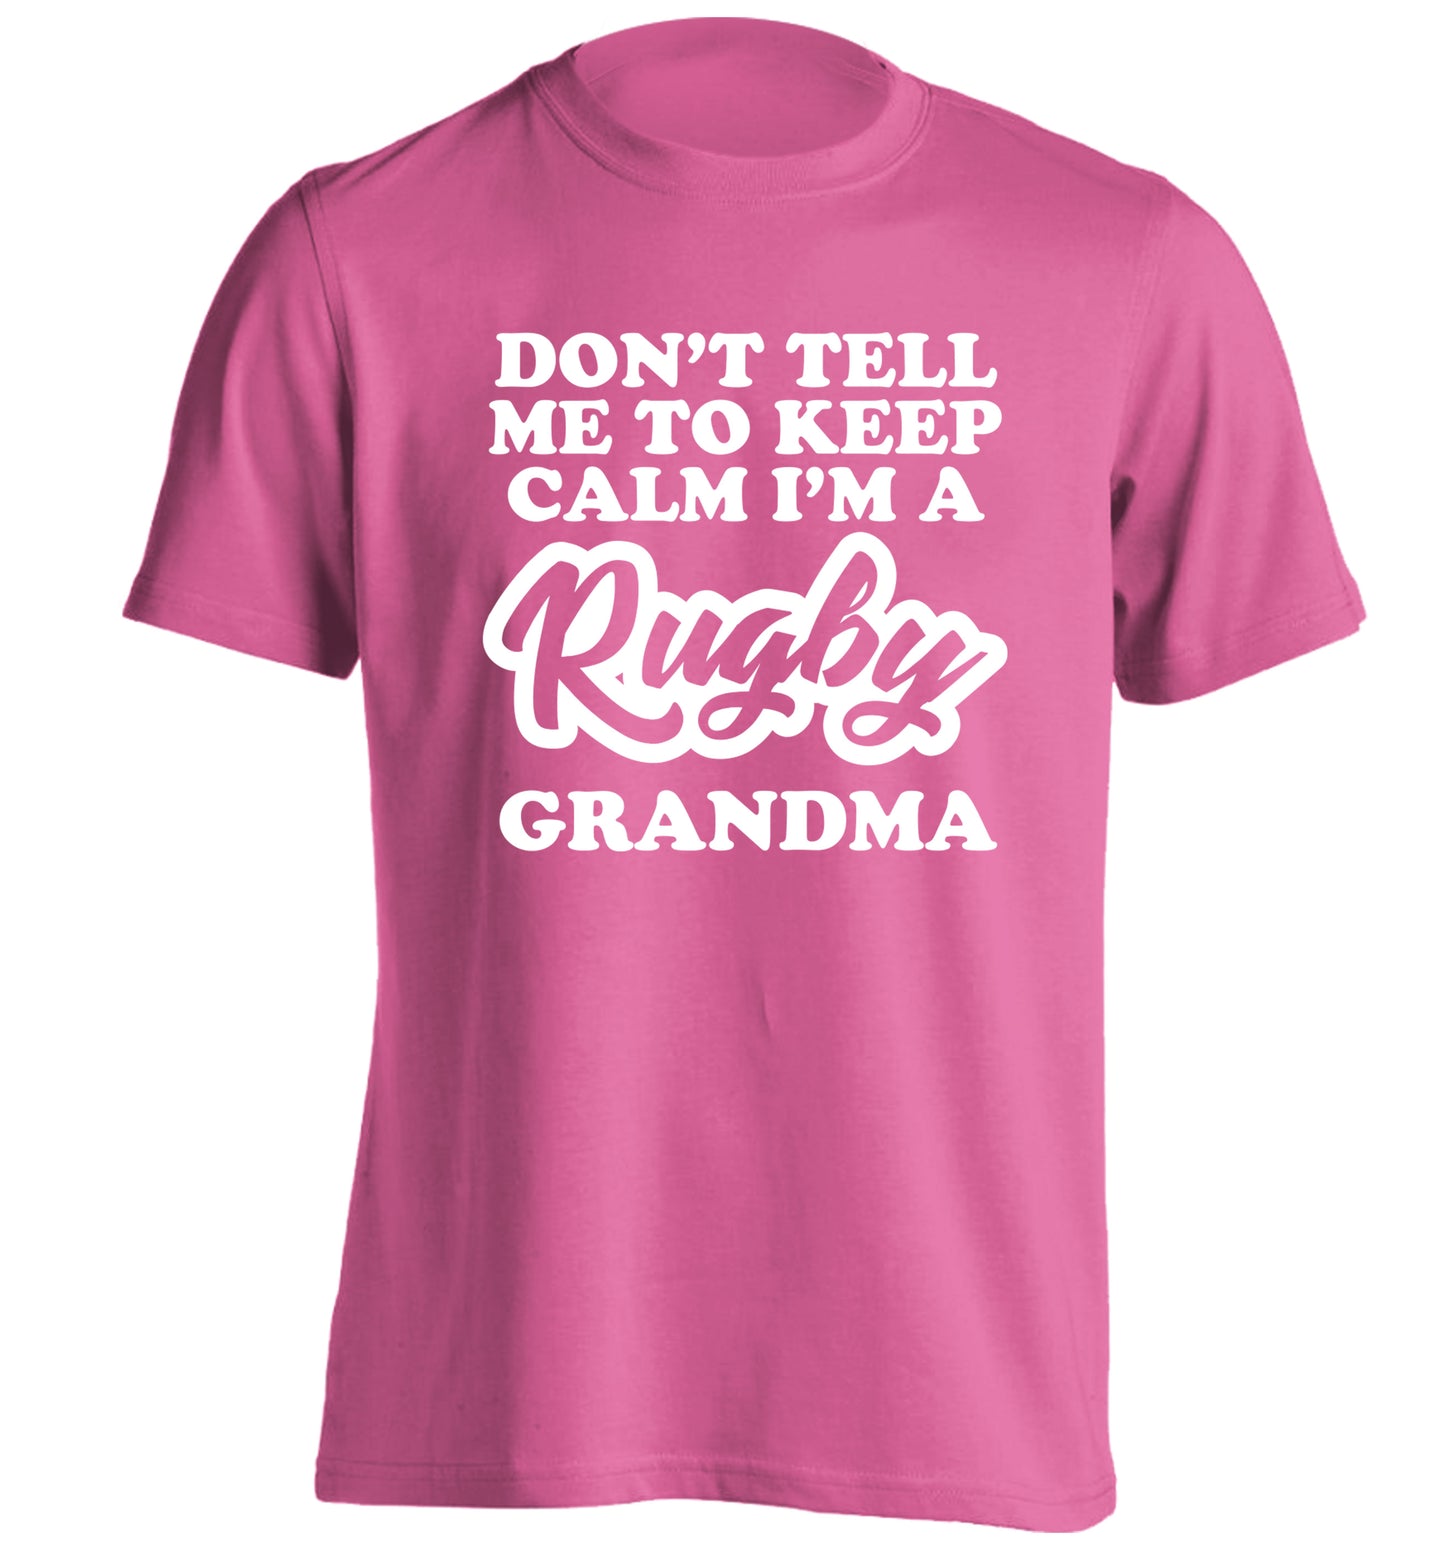 Don't tell me to keep calm I'm a rugby grandma adults unisex pink Tshirt 2XL